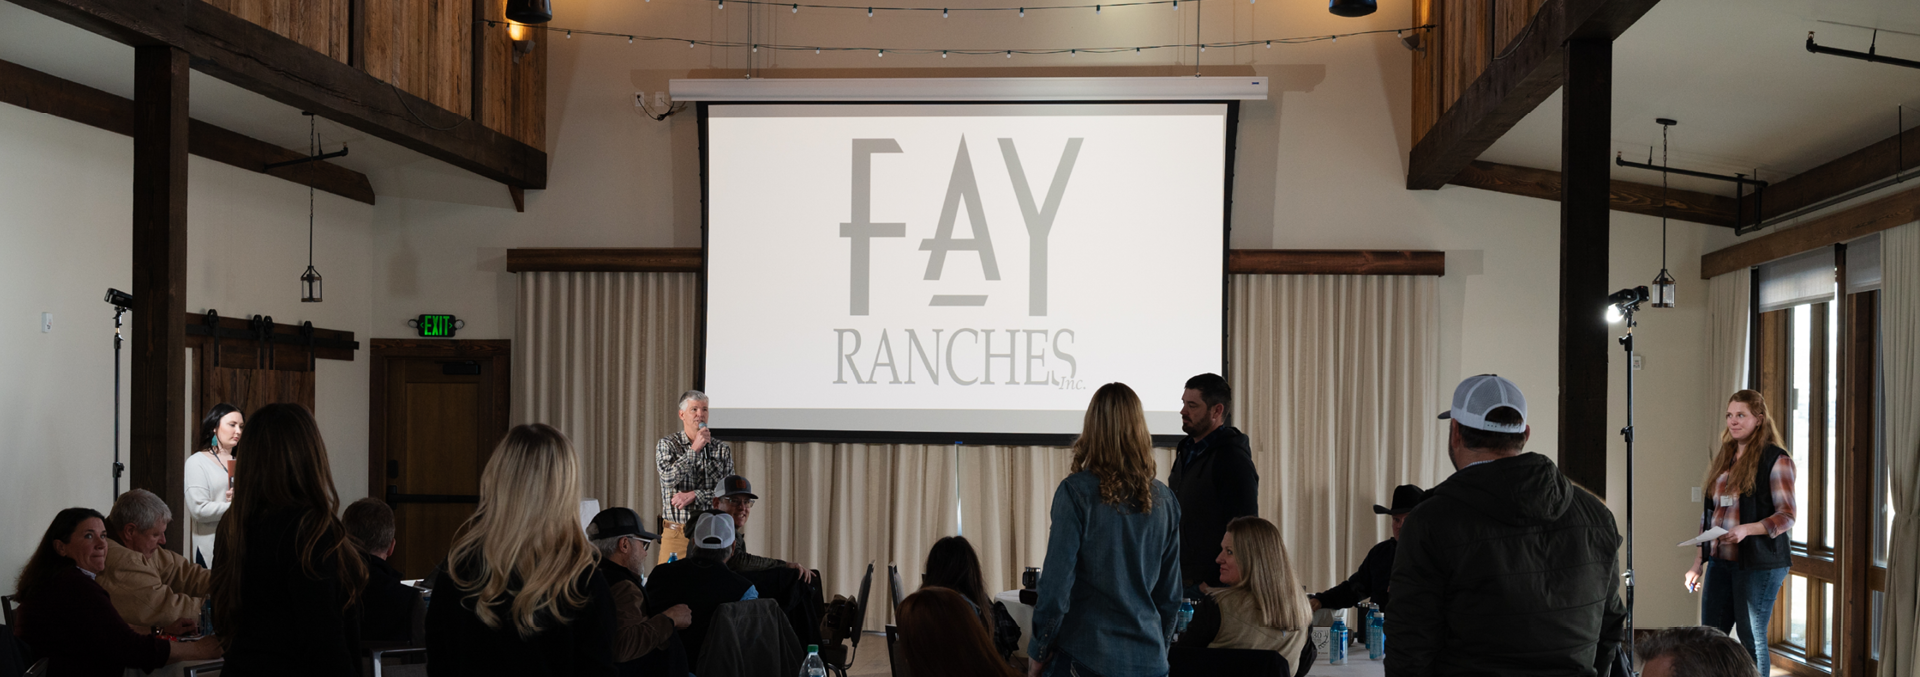 Fay Ranches Summit Conference